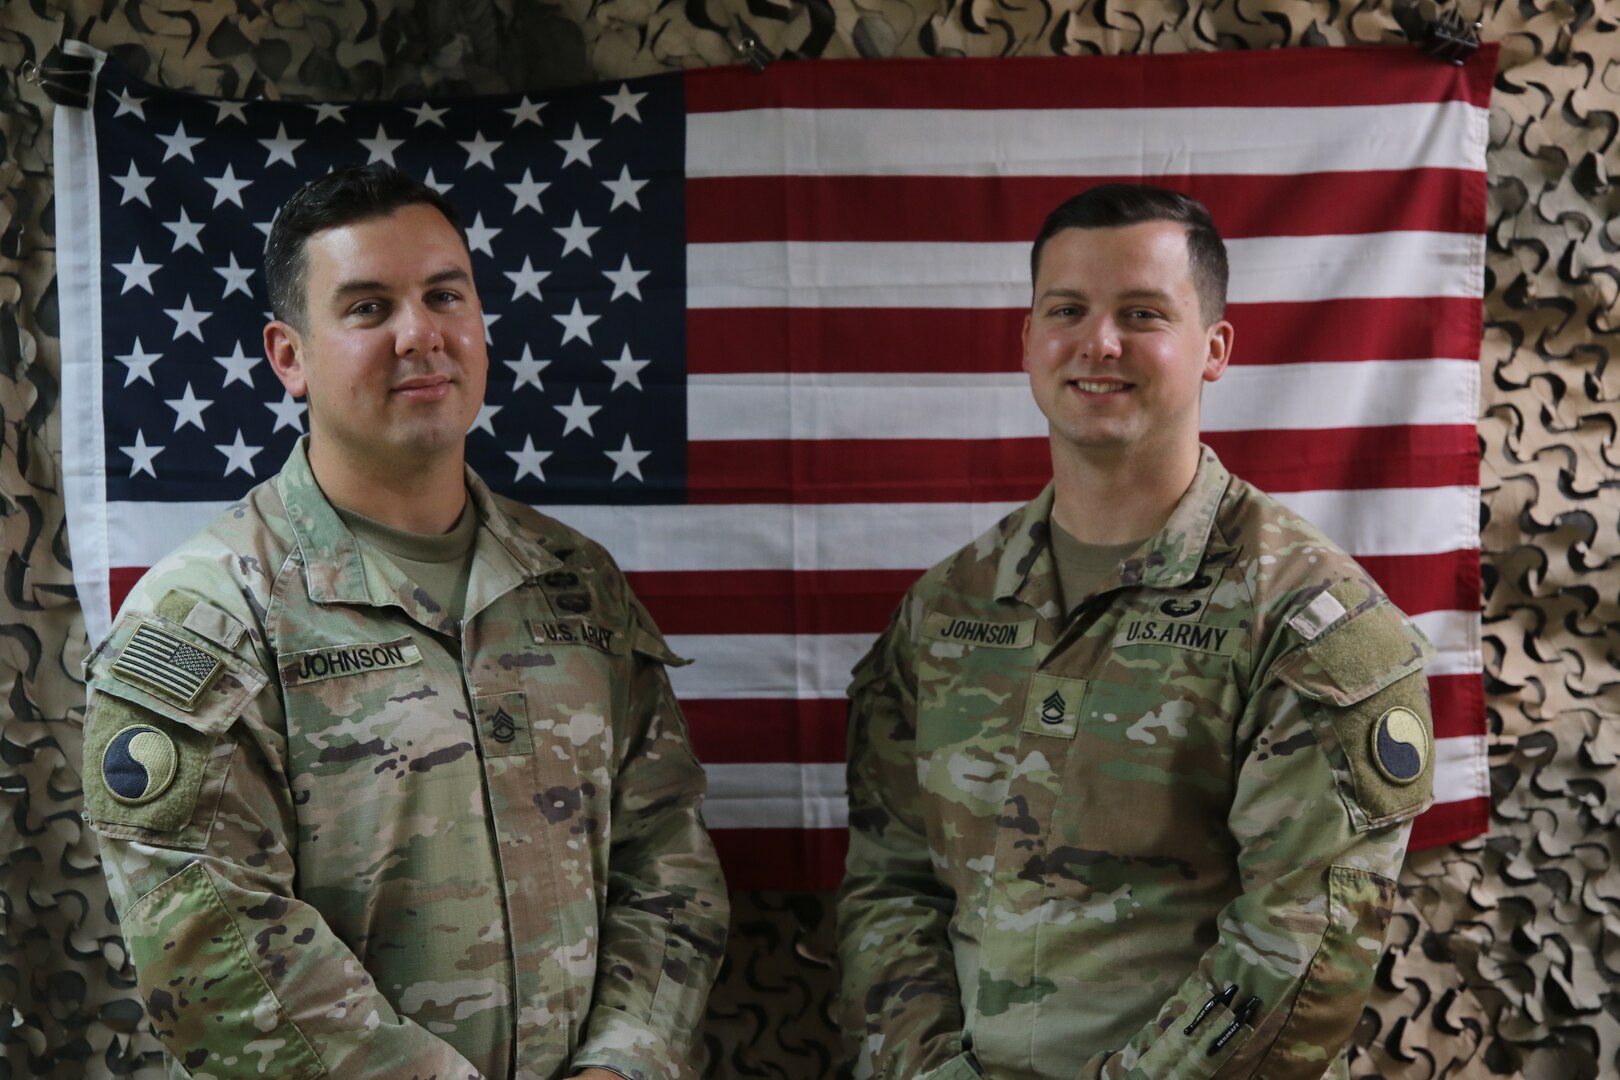 Sgt. 1st Class Robert Johnson and Sgt. 1st Class Aaron Johnson are brothers who are deployed together with the 29th Infantry Division to Kuwait as part of Task Force Spartan.